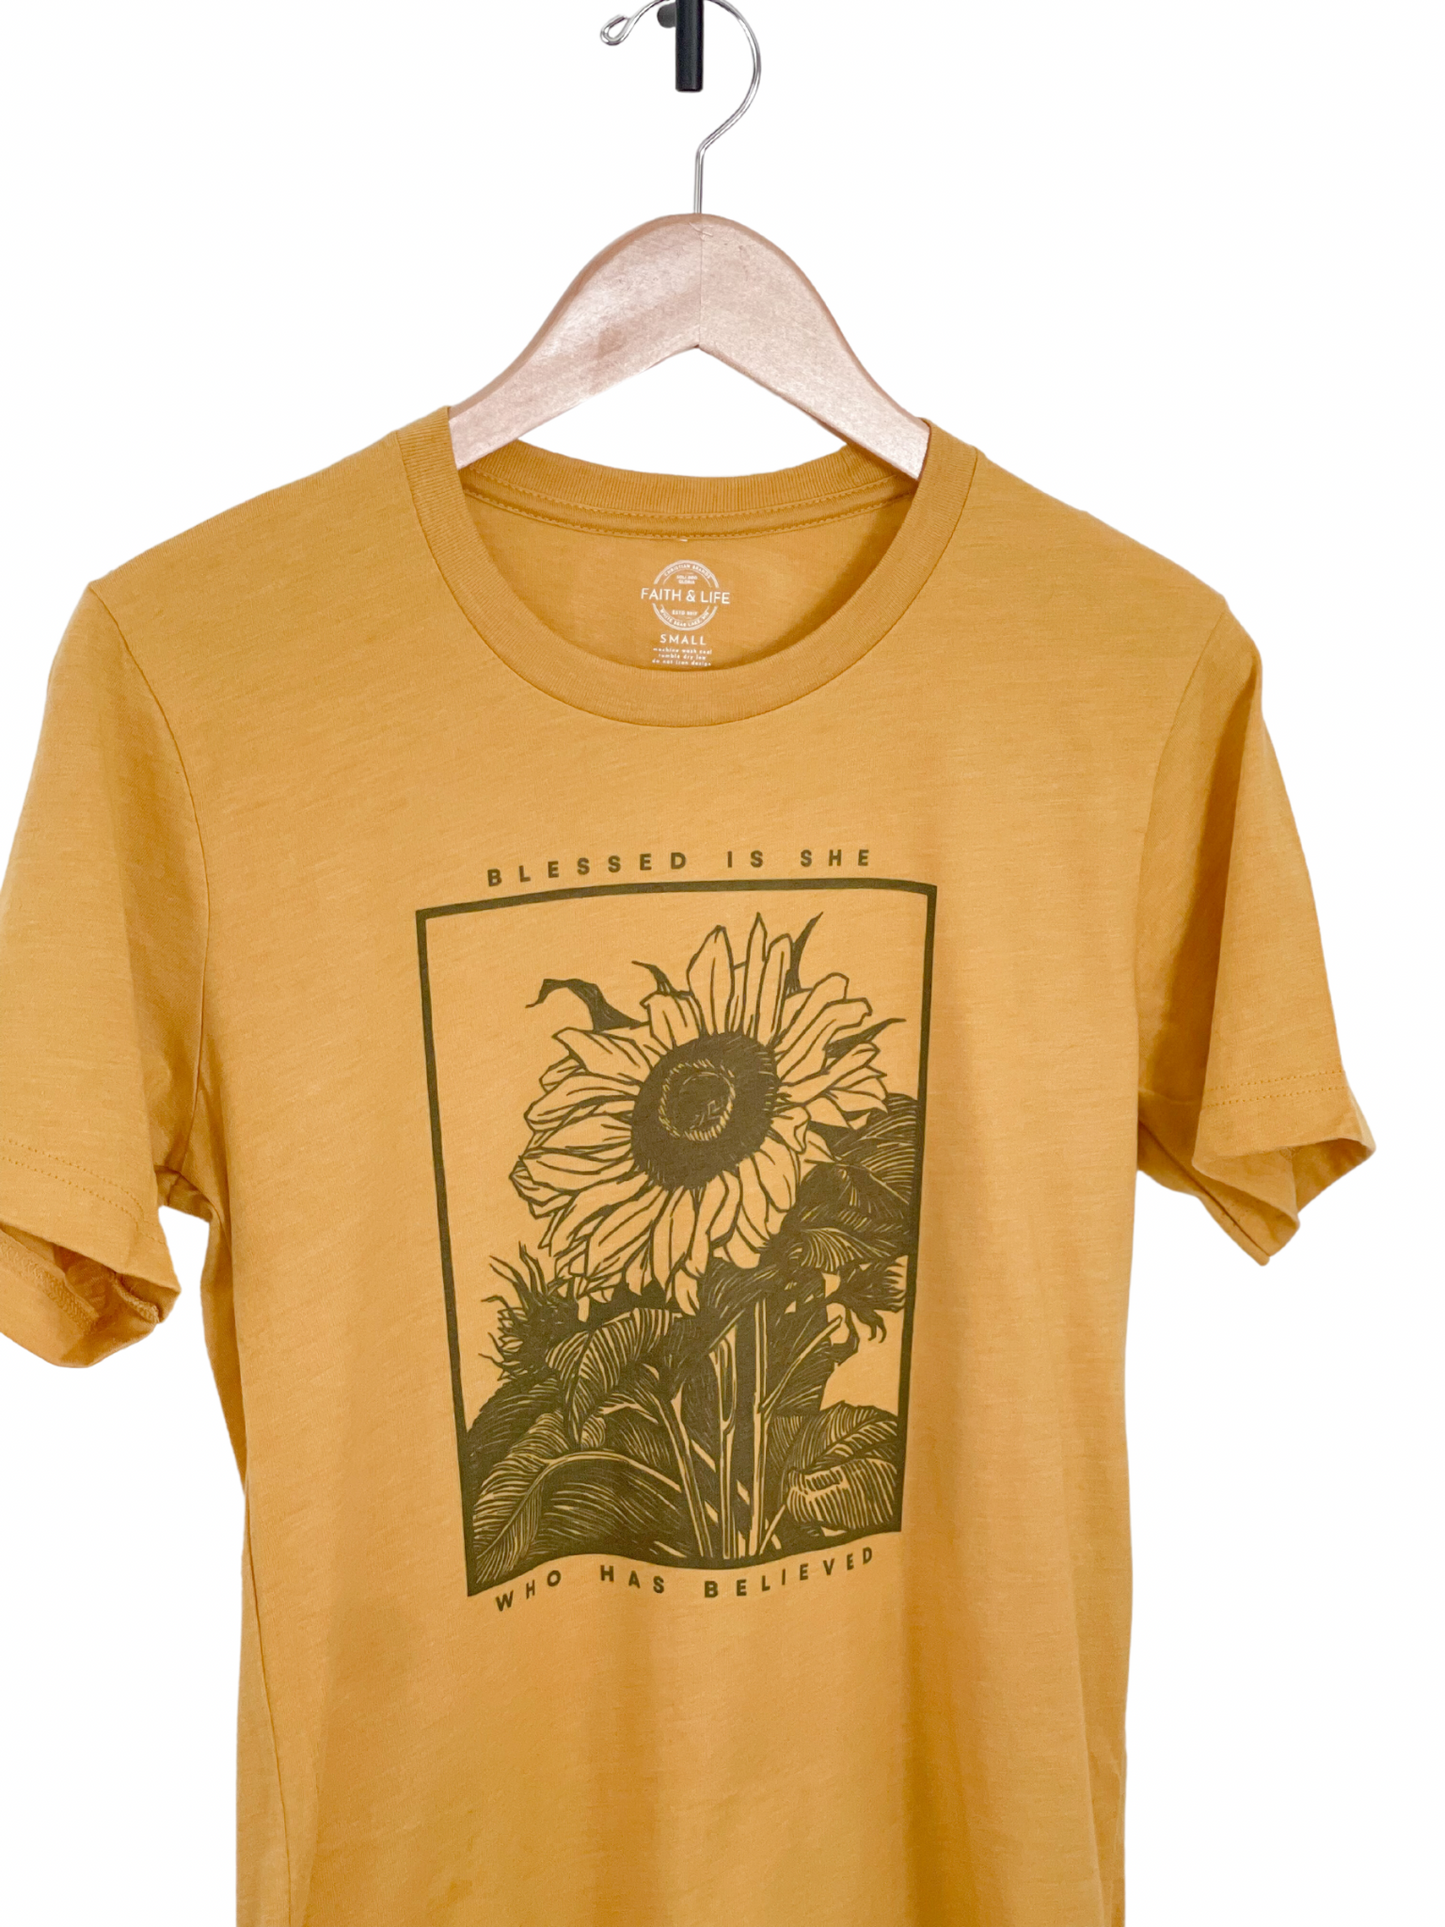 'Blessed is She' Vintage Wash T-shirt